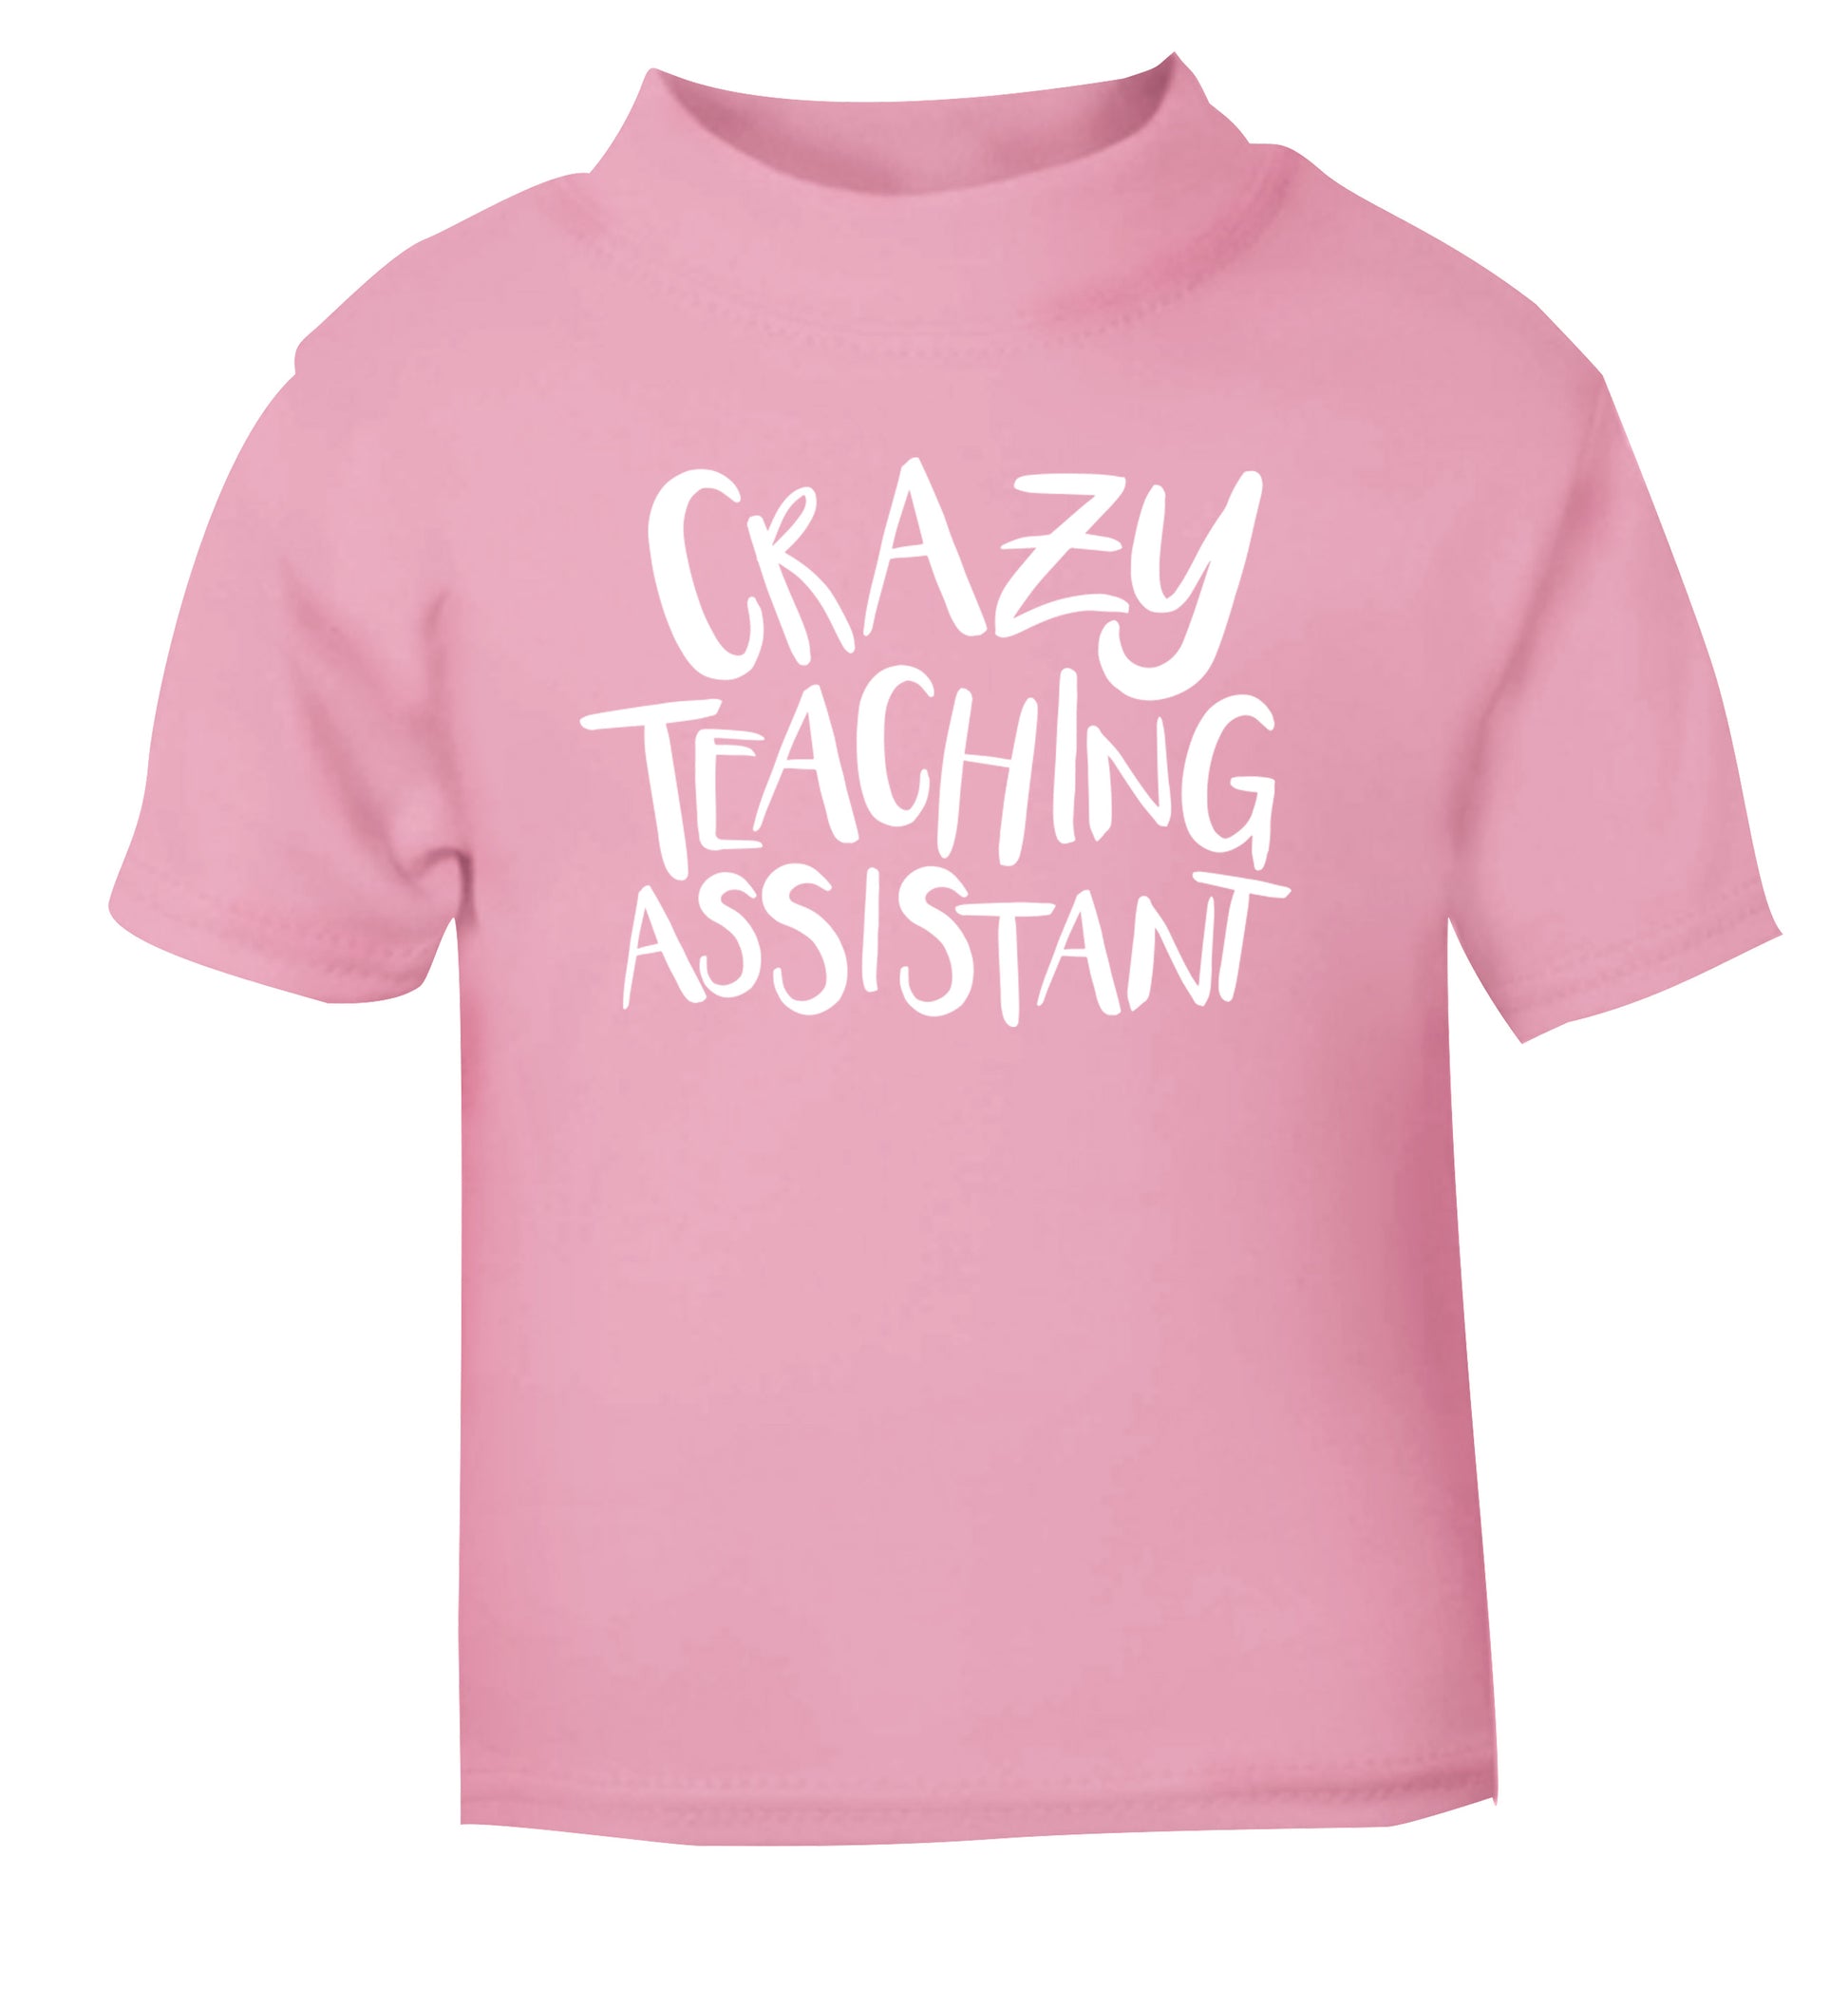 Crazy Teaching Assistant light pink Baby Toddler Tshirt 2 Years